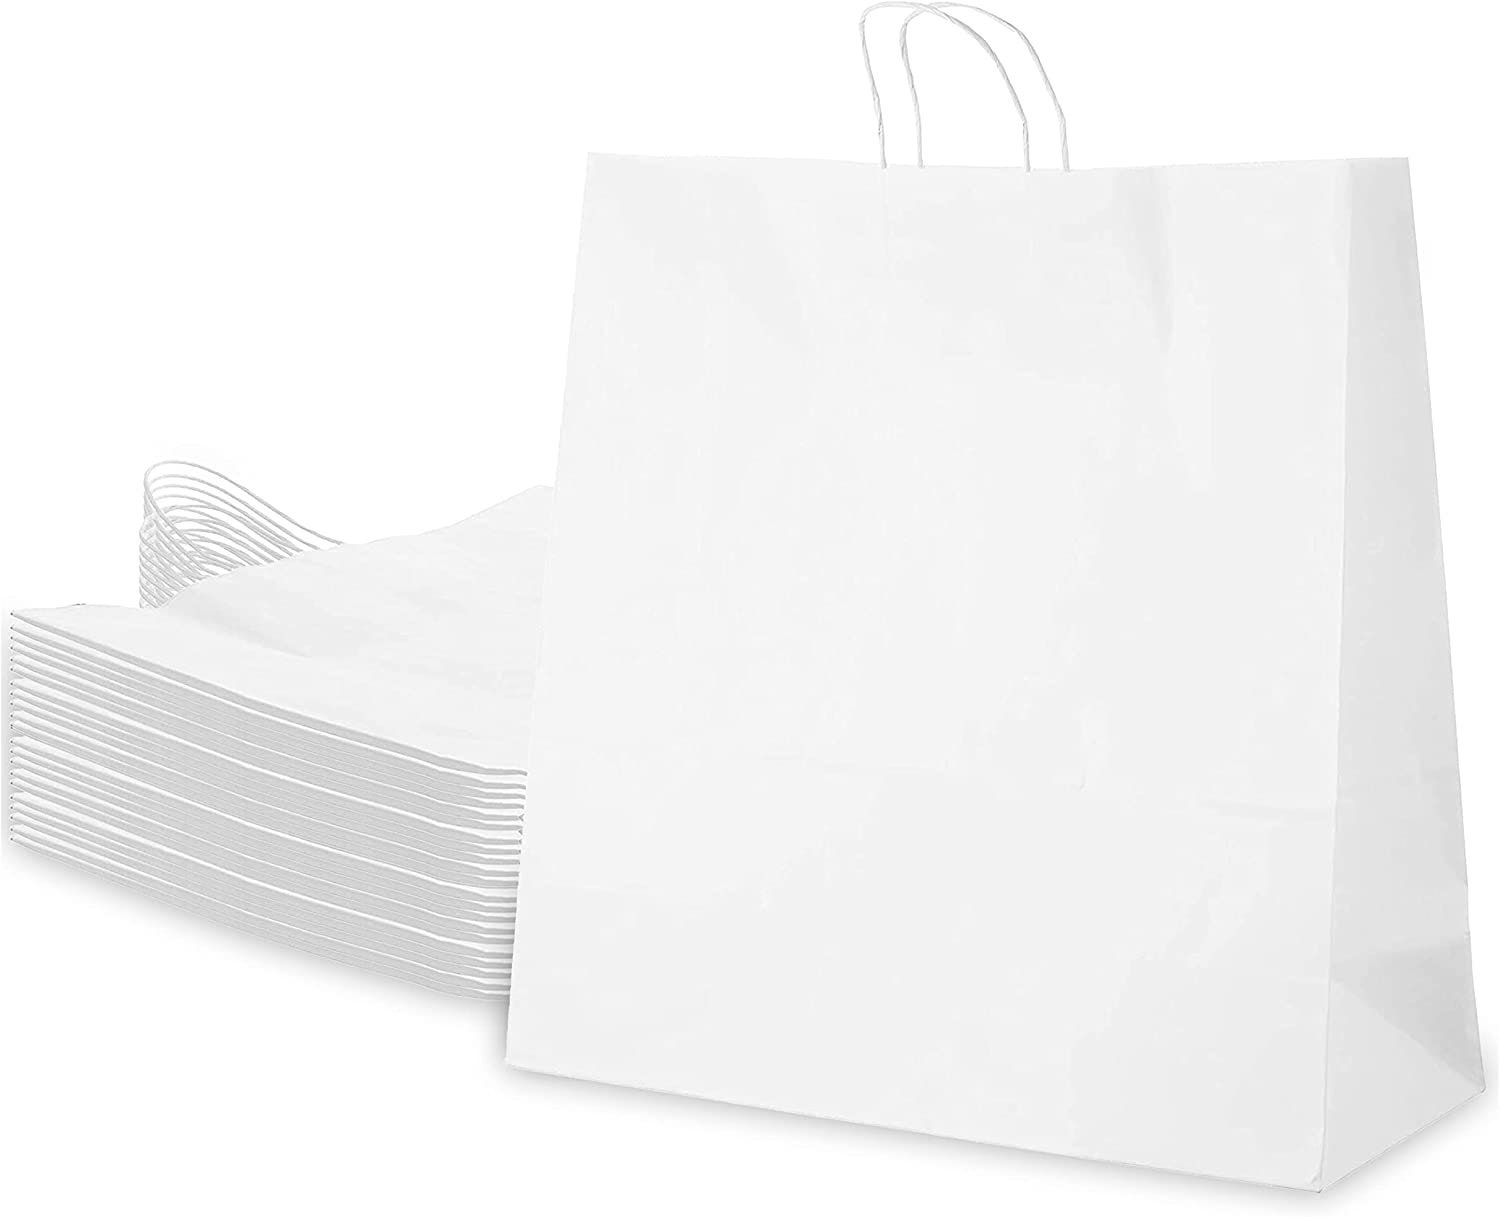 Paper Lunch Bags 100 Count Large White Lunch Bags White Paper Bags 8lb White Lunch Sacks Strong for Small Business